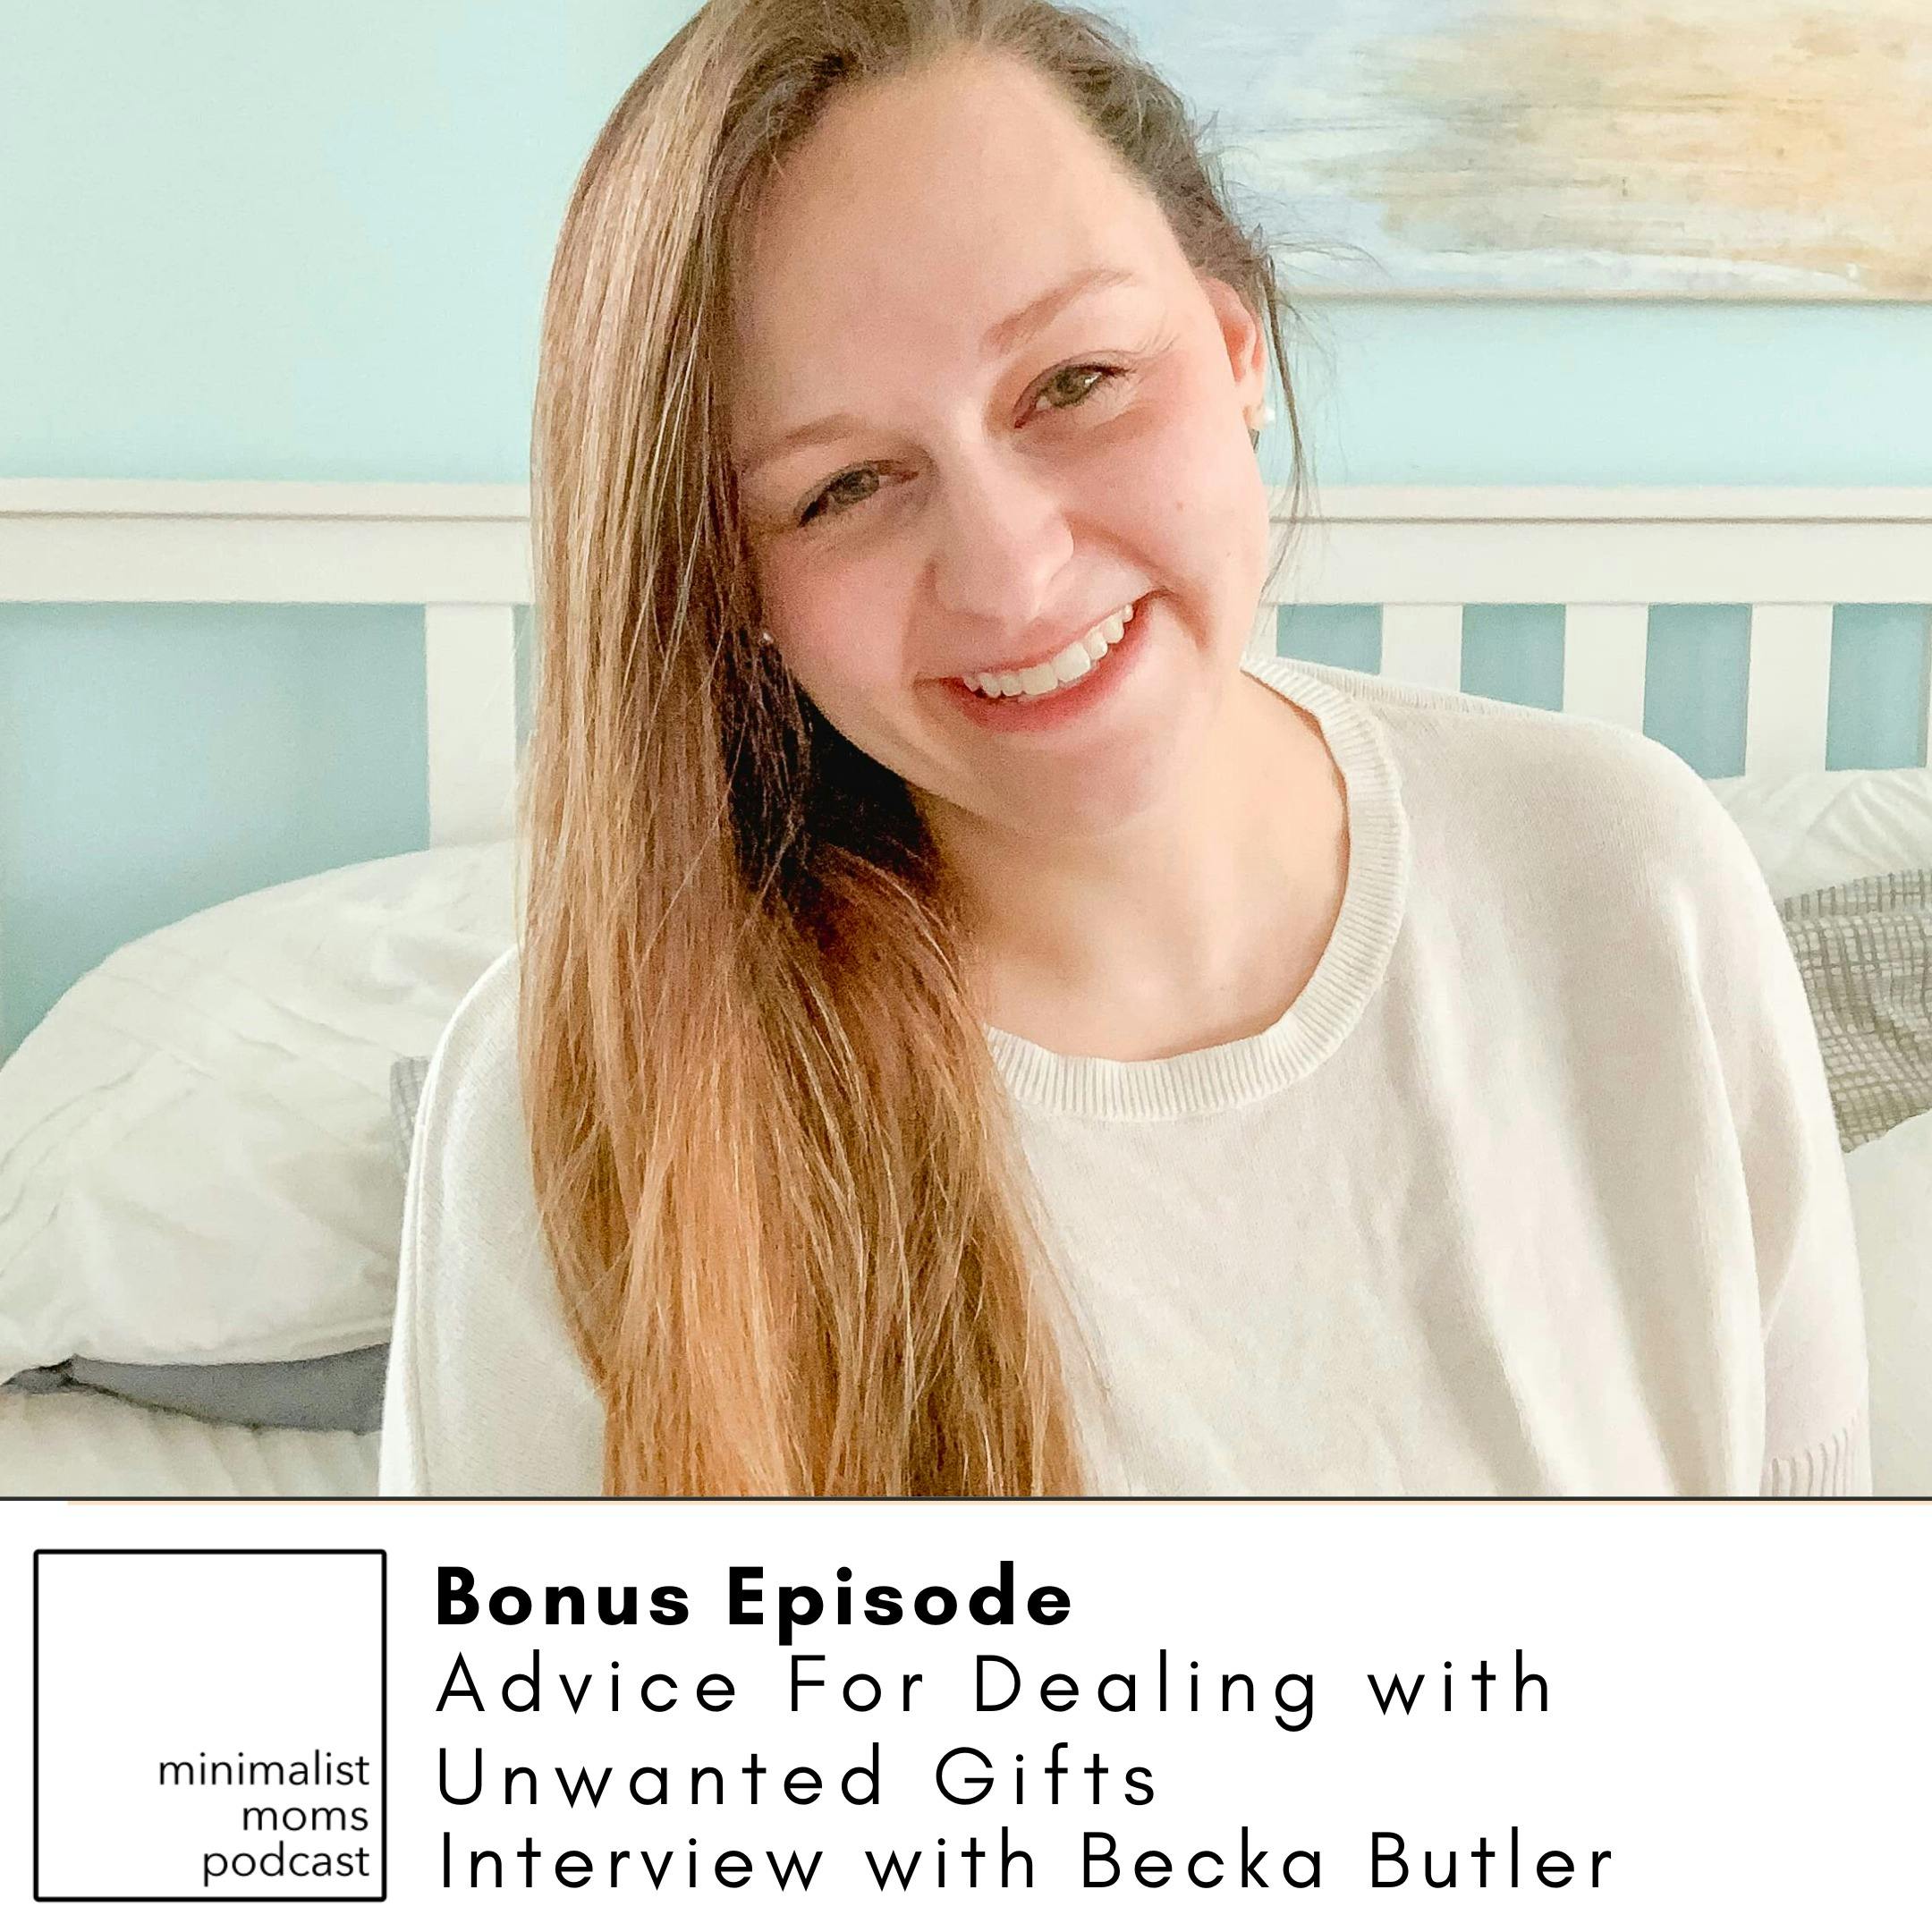 Bonus Episode: Advice For Dealing with Unwanted Gifts with Becka Butler